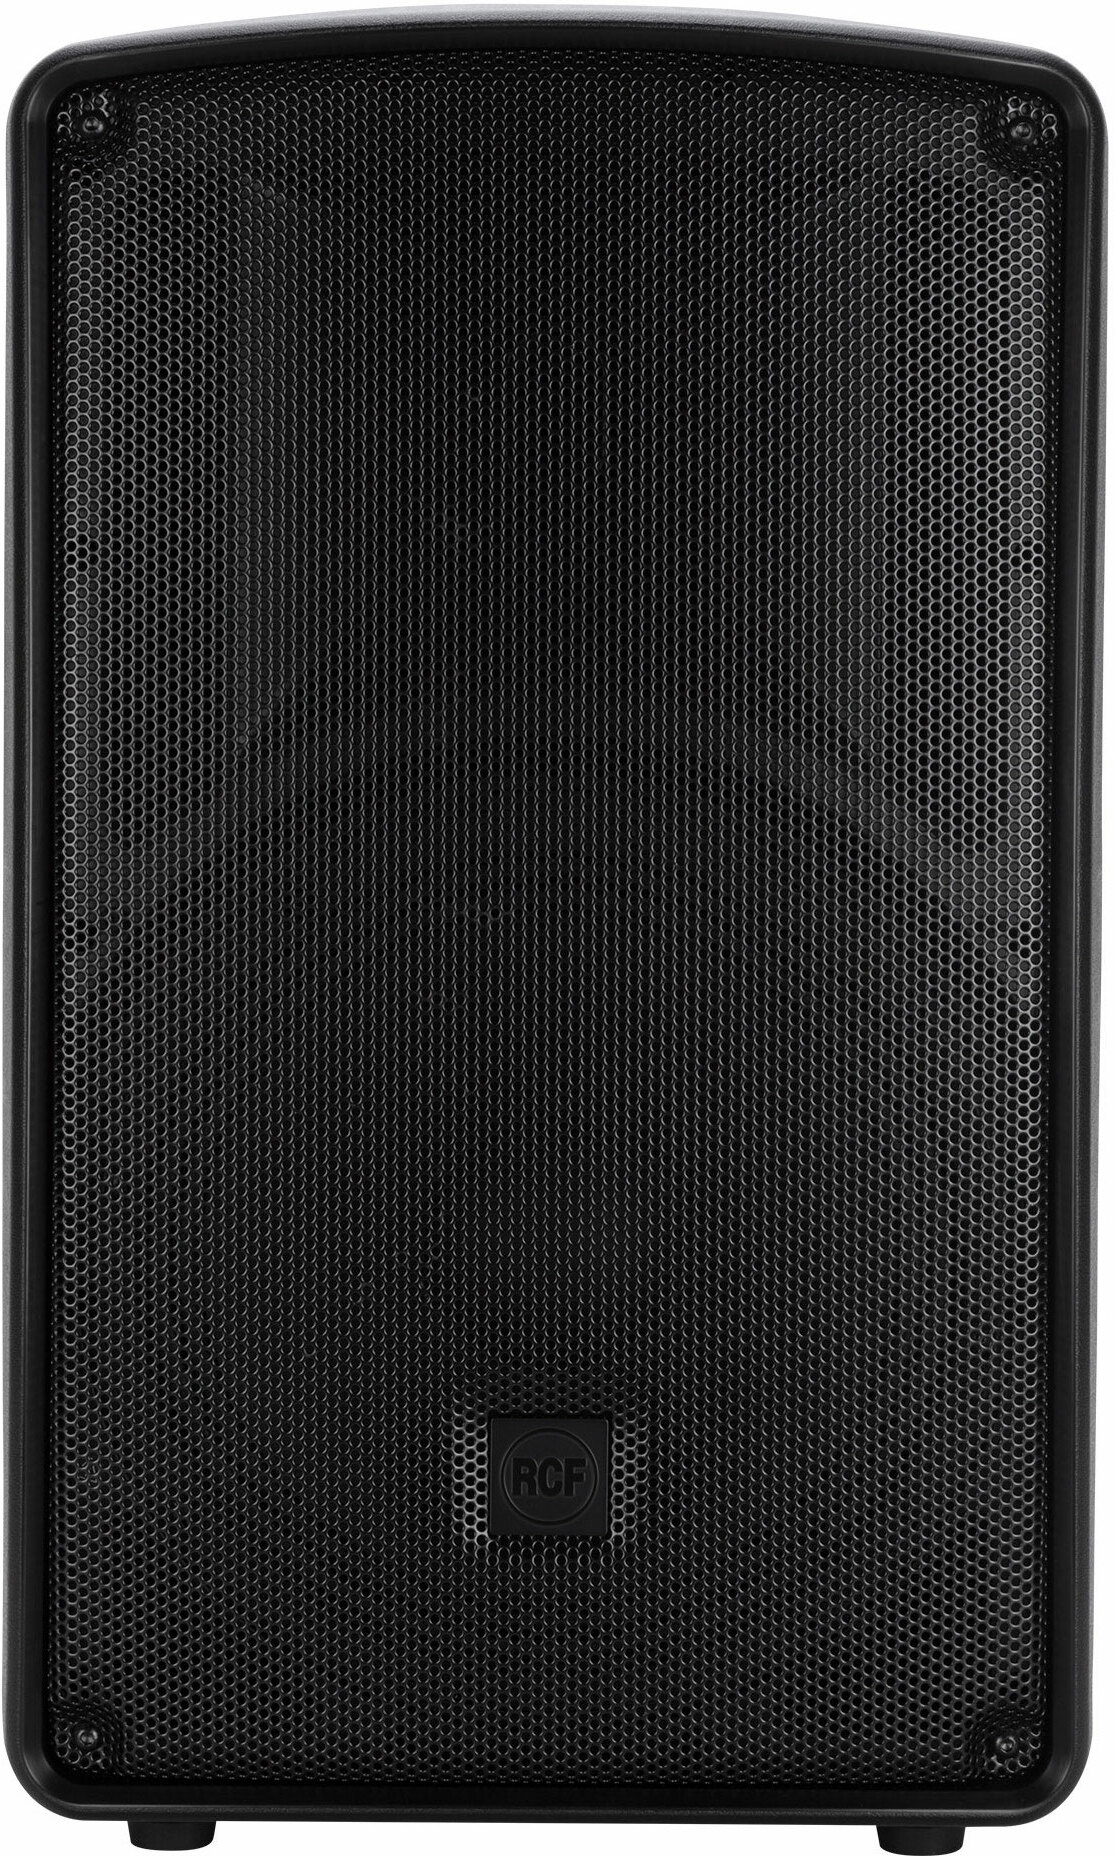 Rcf Hd 12-a Mk5 - Active full-range speaker - Main picture